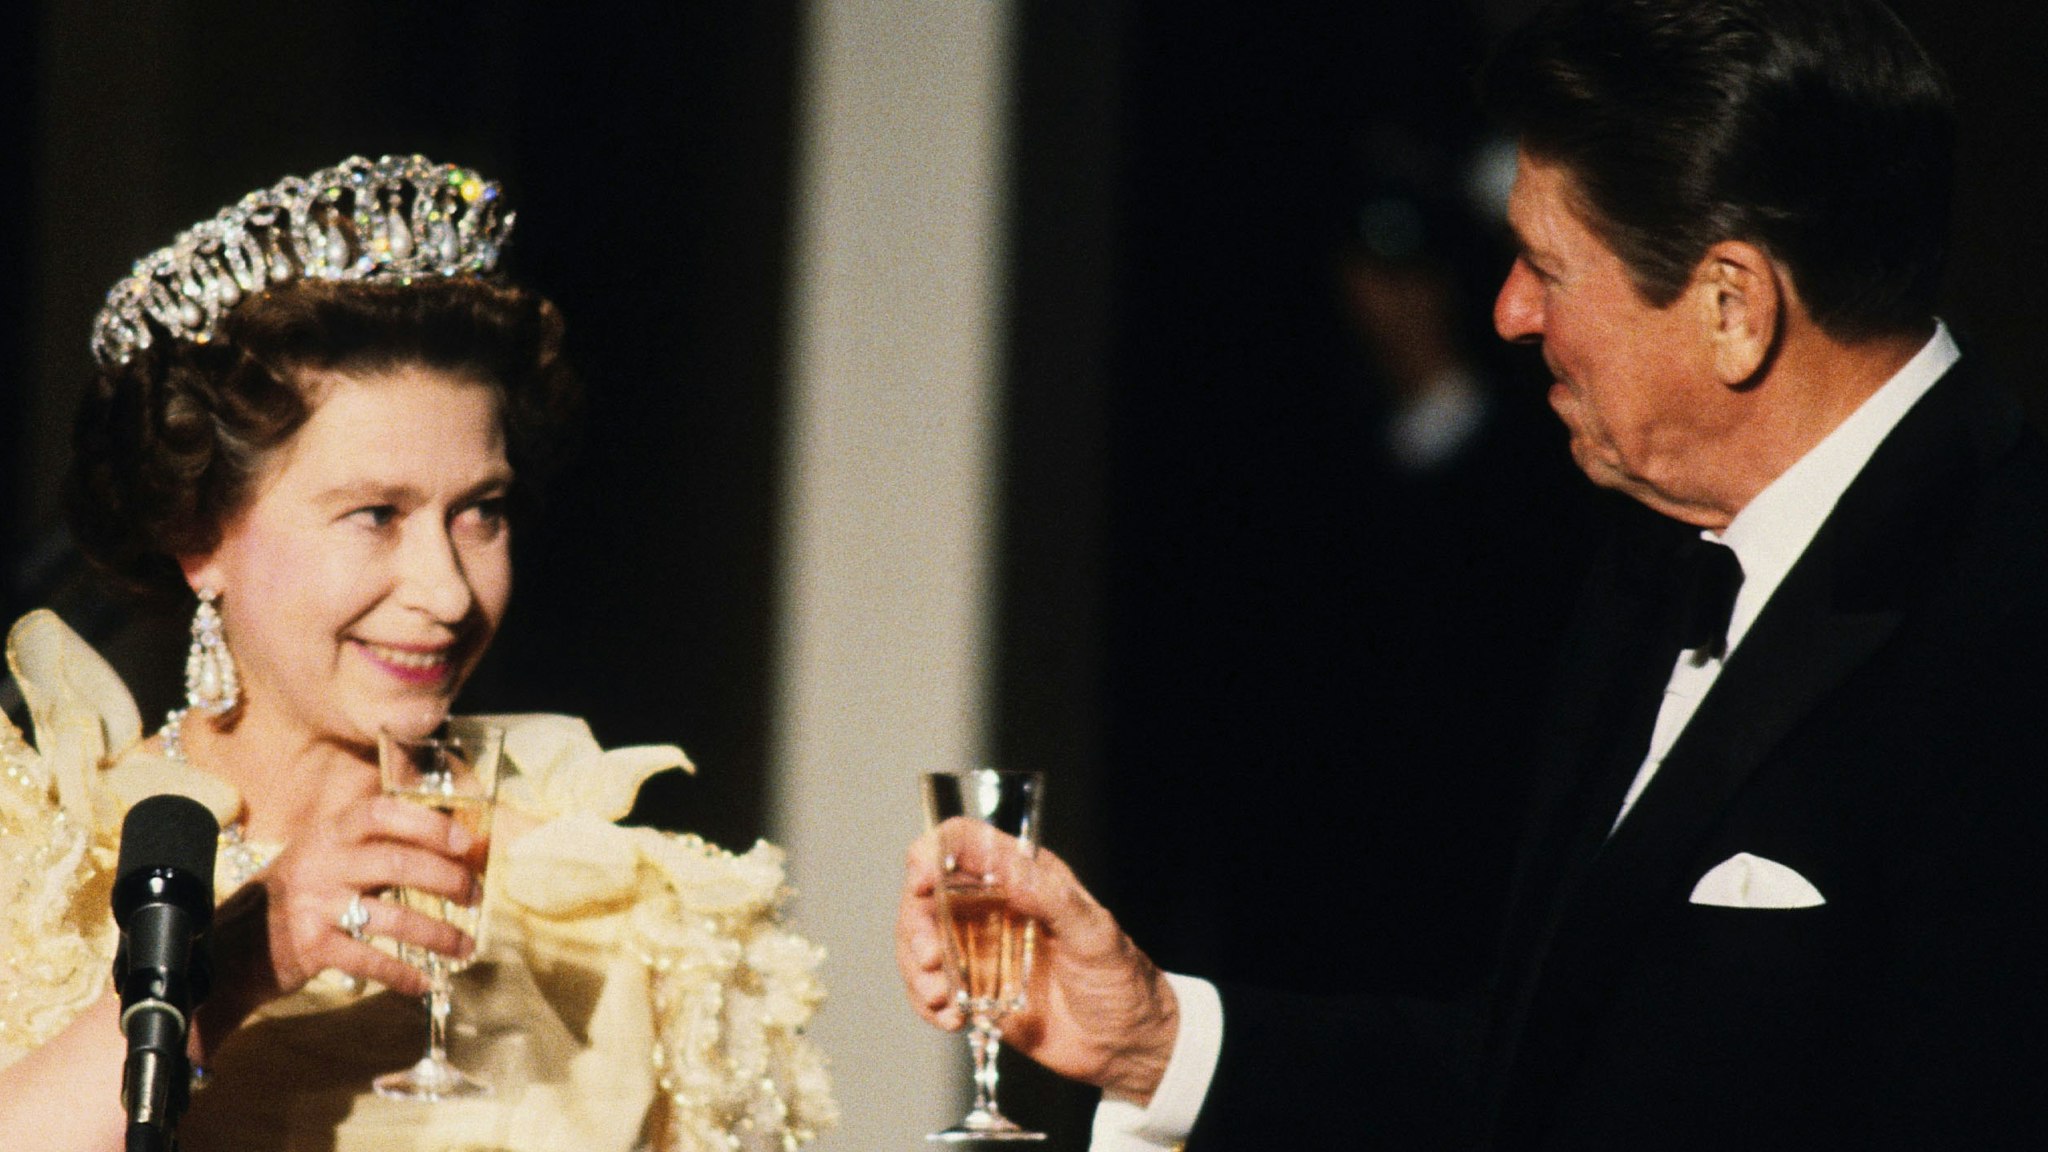 Queen Elizabeth ll toasts President Ronald Reagan at a banquet during the Queen's official visit to the US in March 1983 in in San Francisco, California.